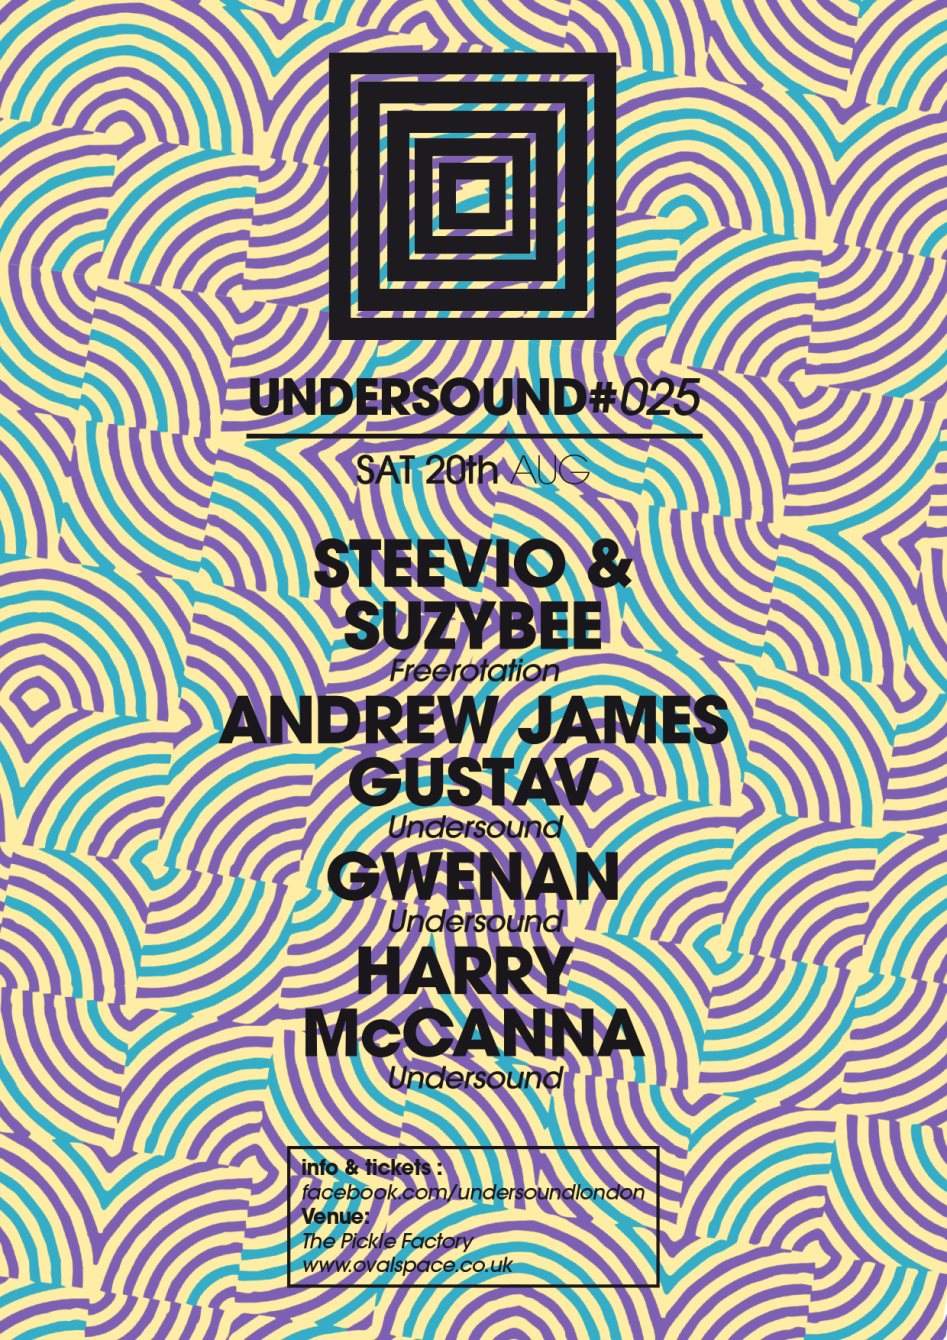 Undersound #25 - Freerotation Takeover with Steevio, Suzybee & Undersound Residents - フライヤー表